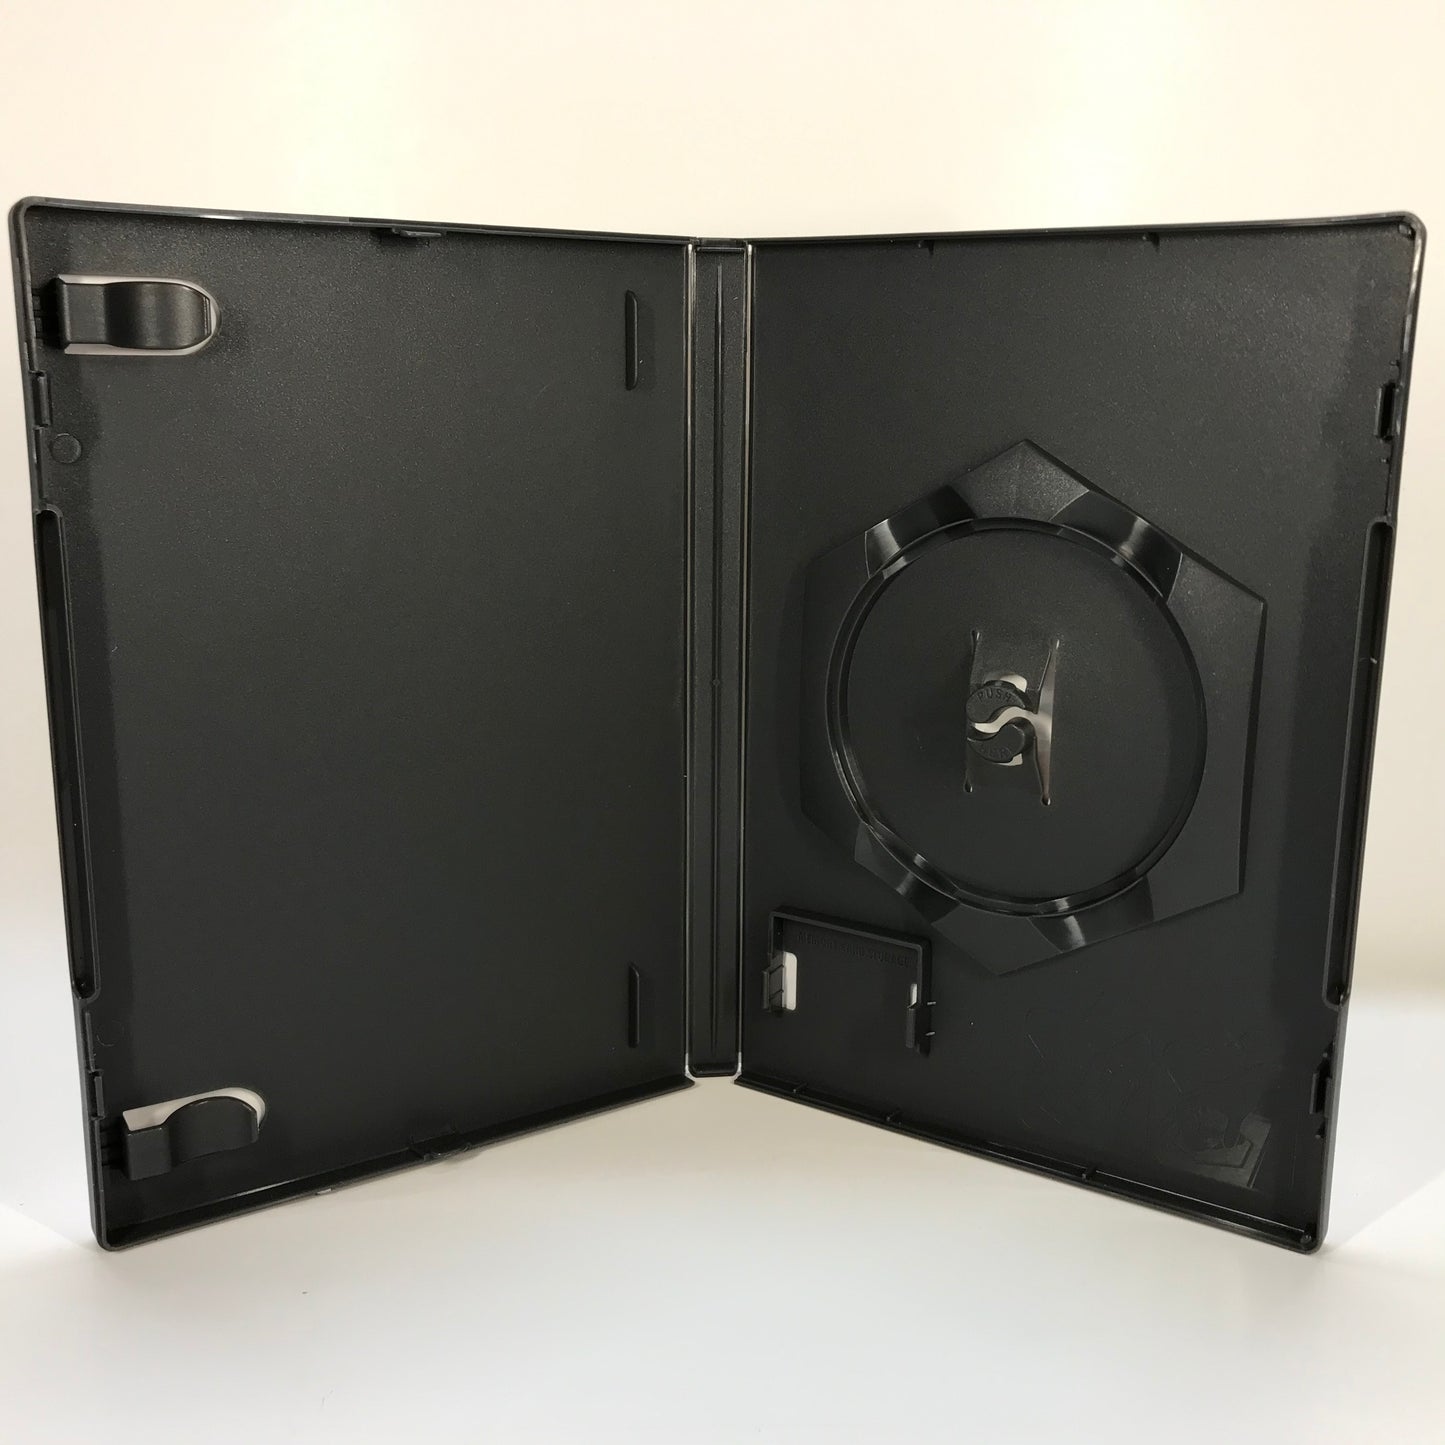 GameCube Replacement Case - NO GAME - PN 03